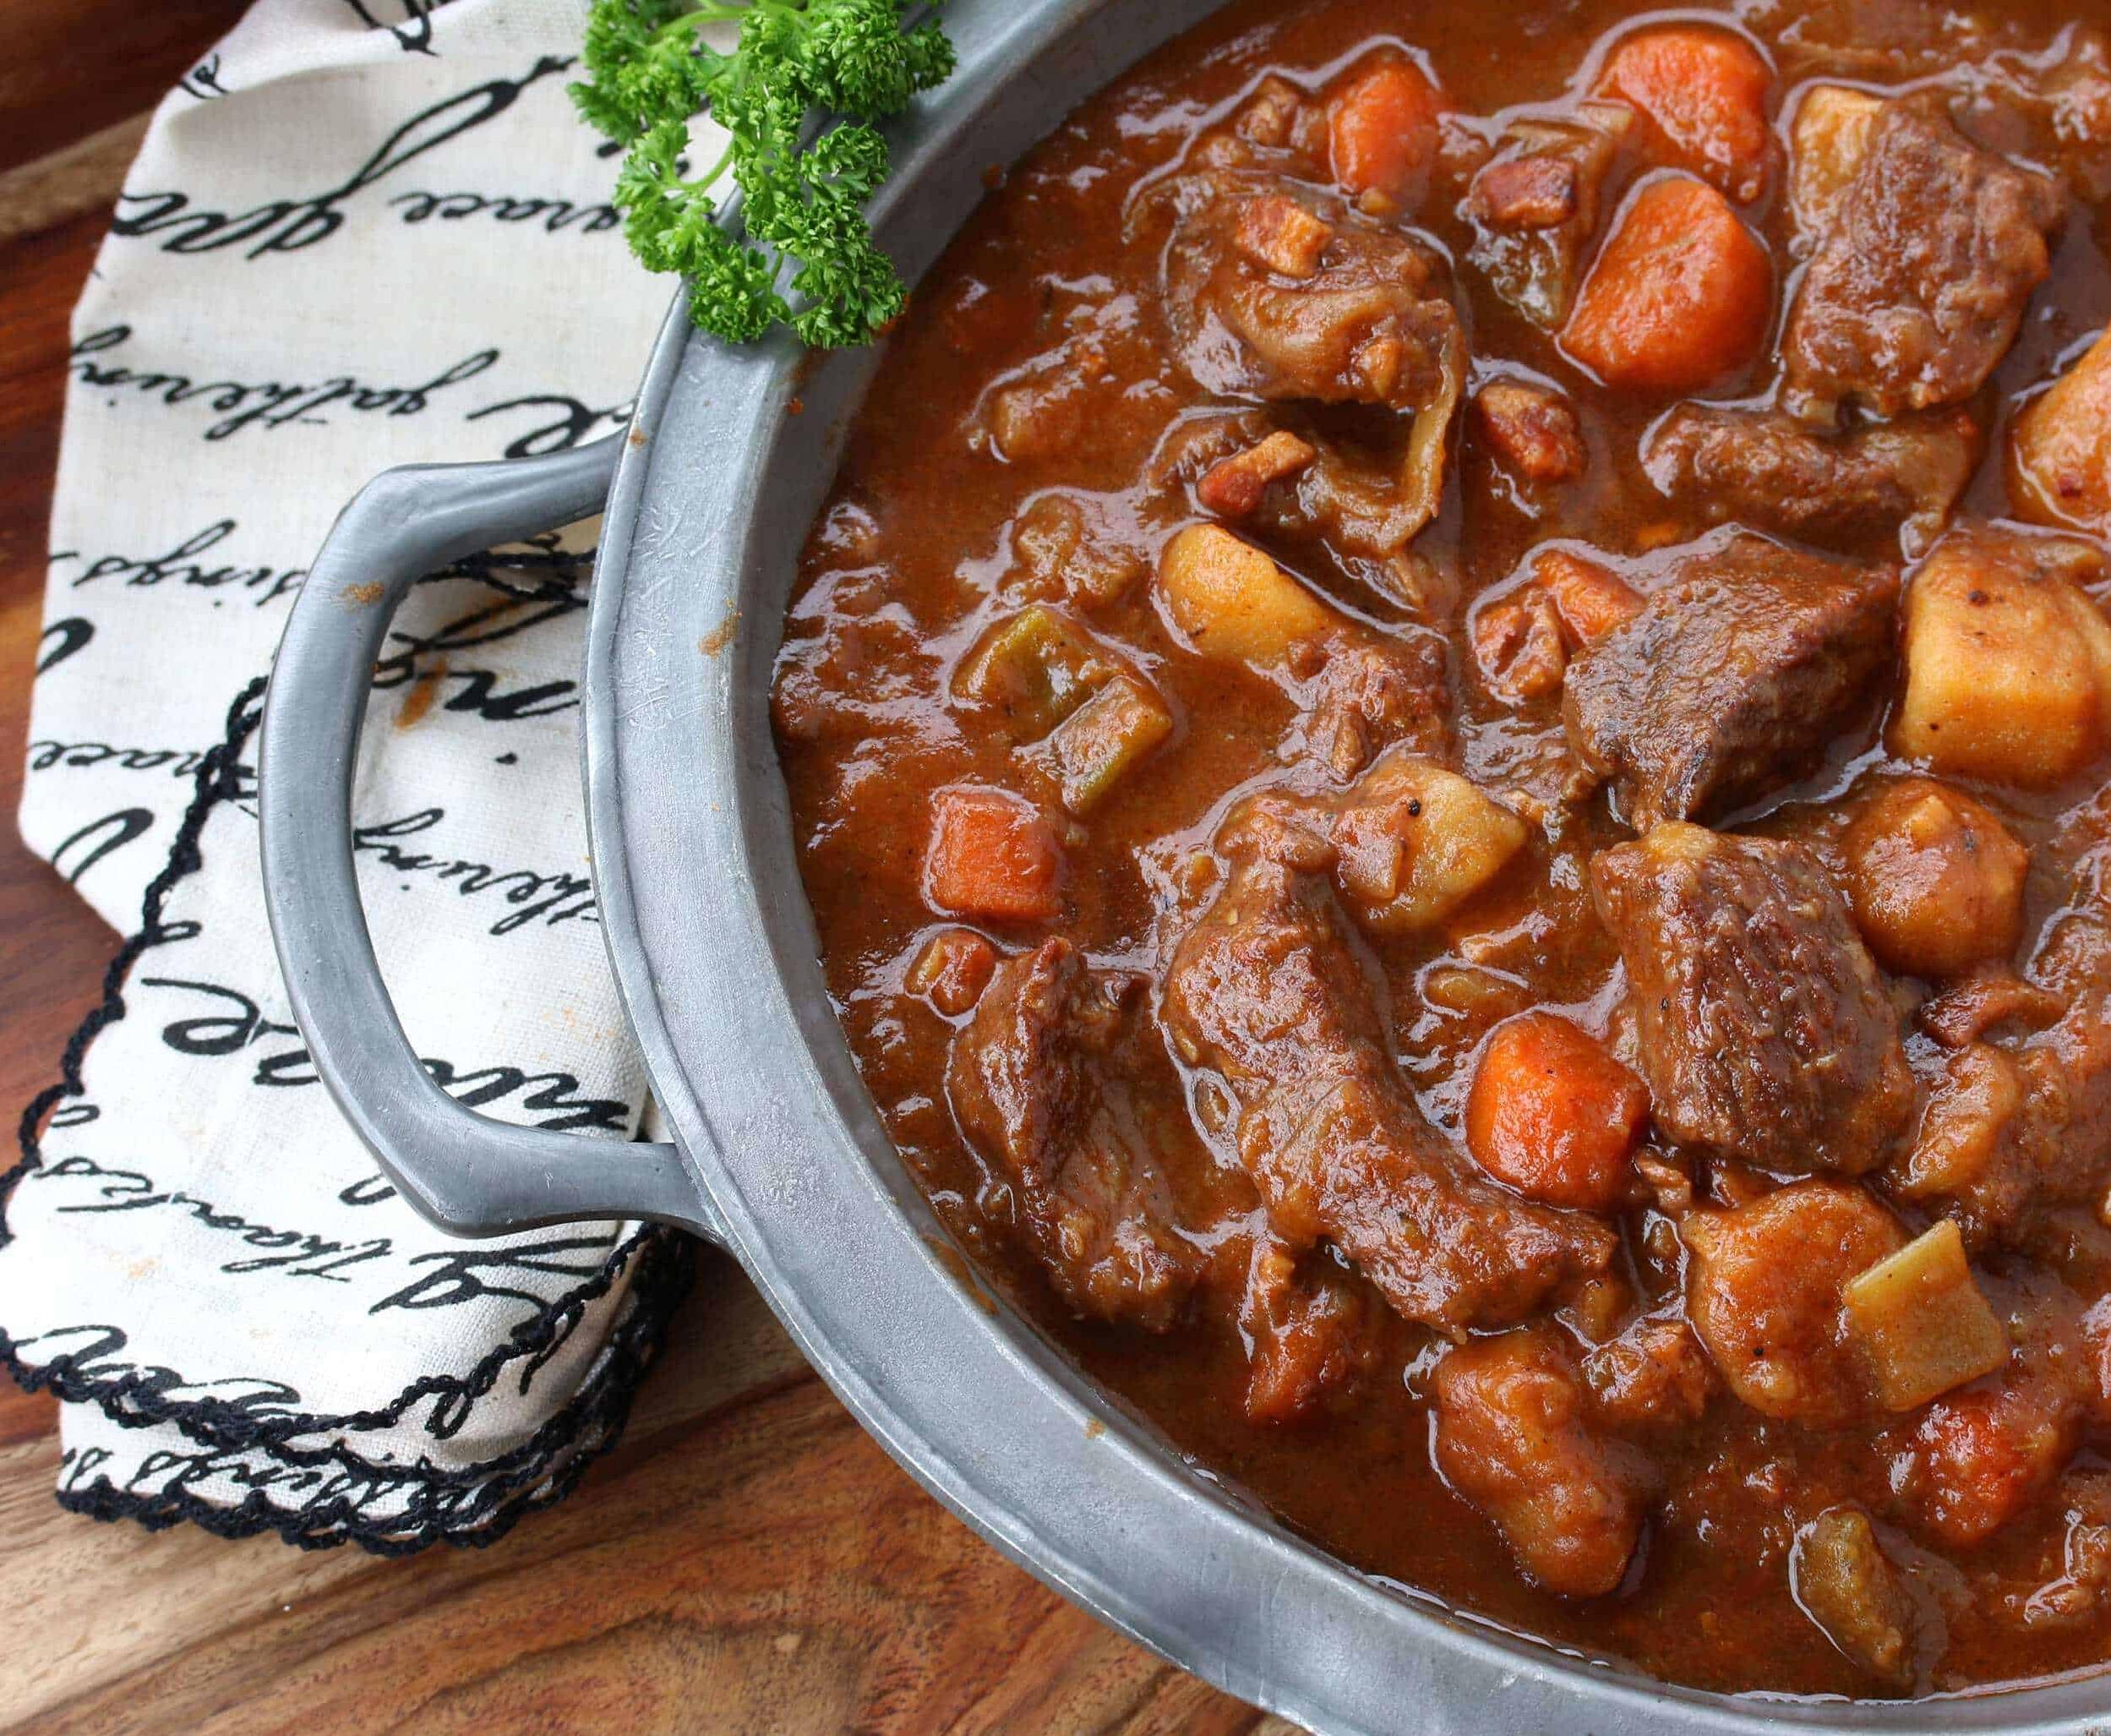  Fill your kitchen with the wonderful aroma of this savory stew!